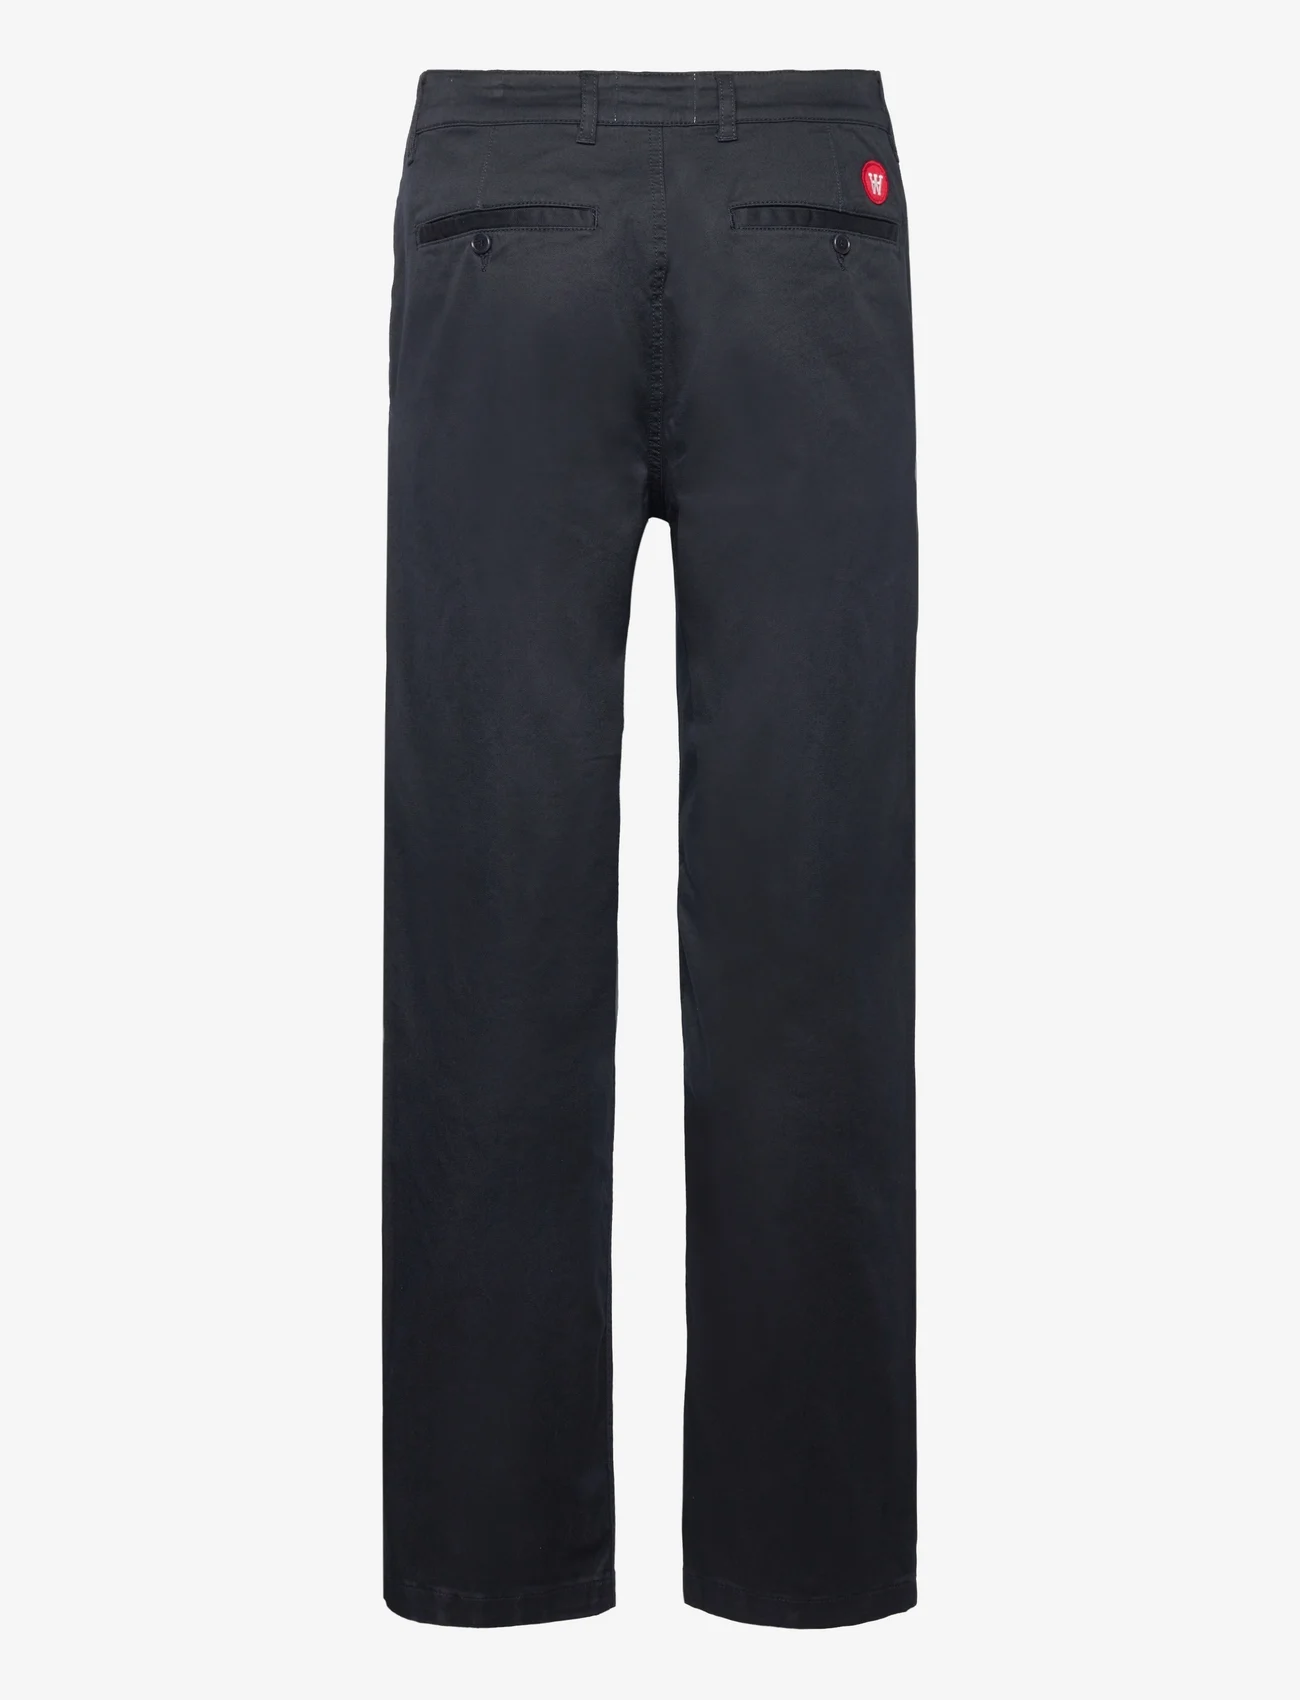 Double A by Wood Wood - Silas classic trousers - chinos - navy - 1